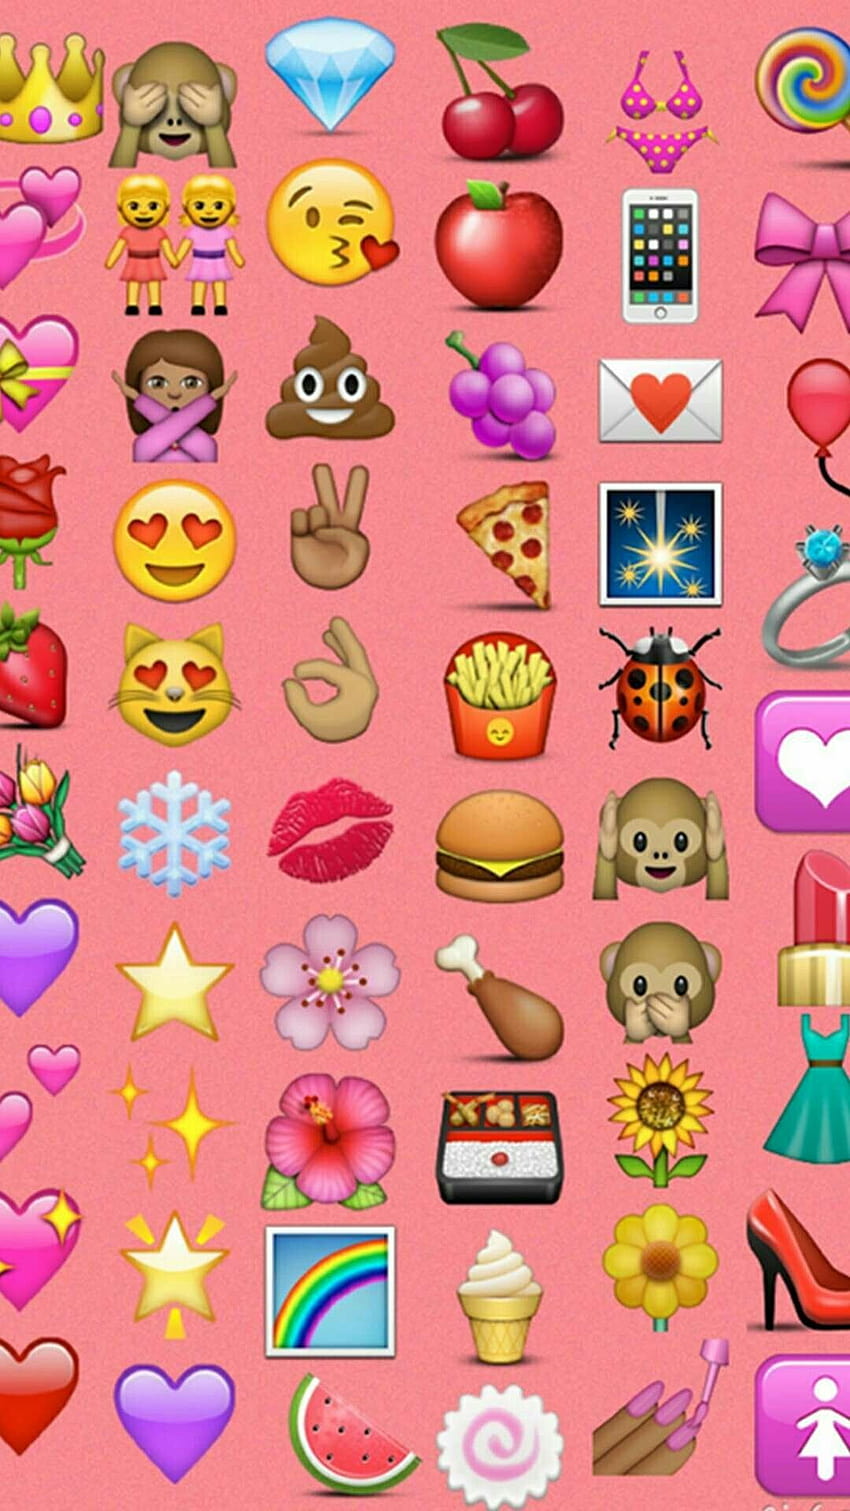 Middle Finger Emoji posted by Michelle Johnson HD phone wallpaper